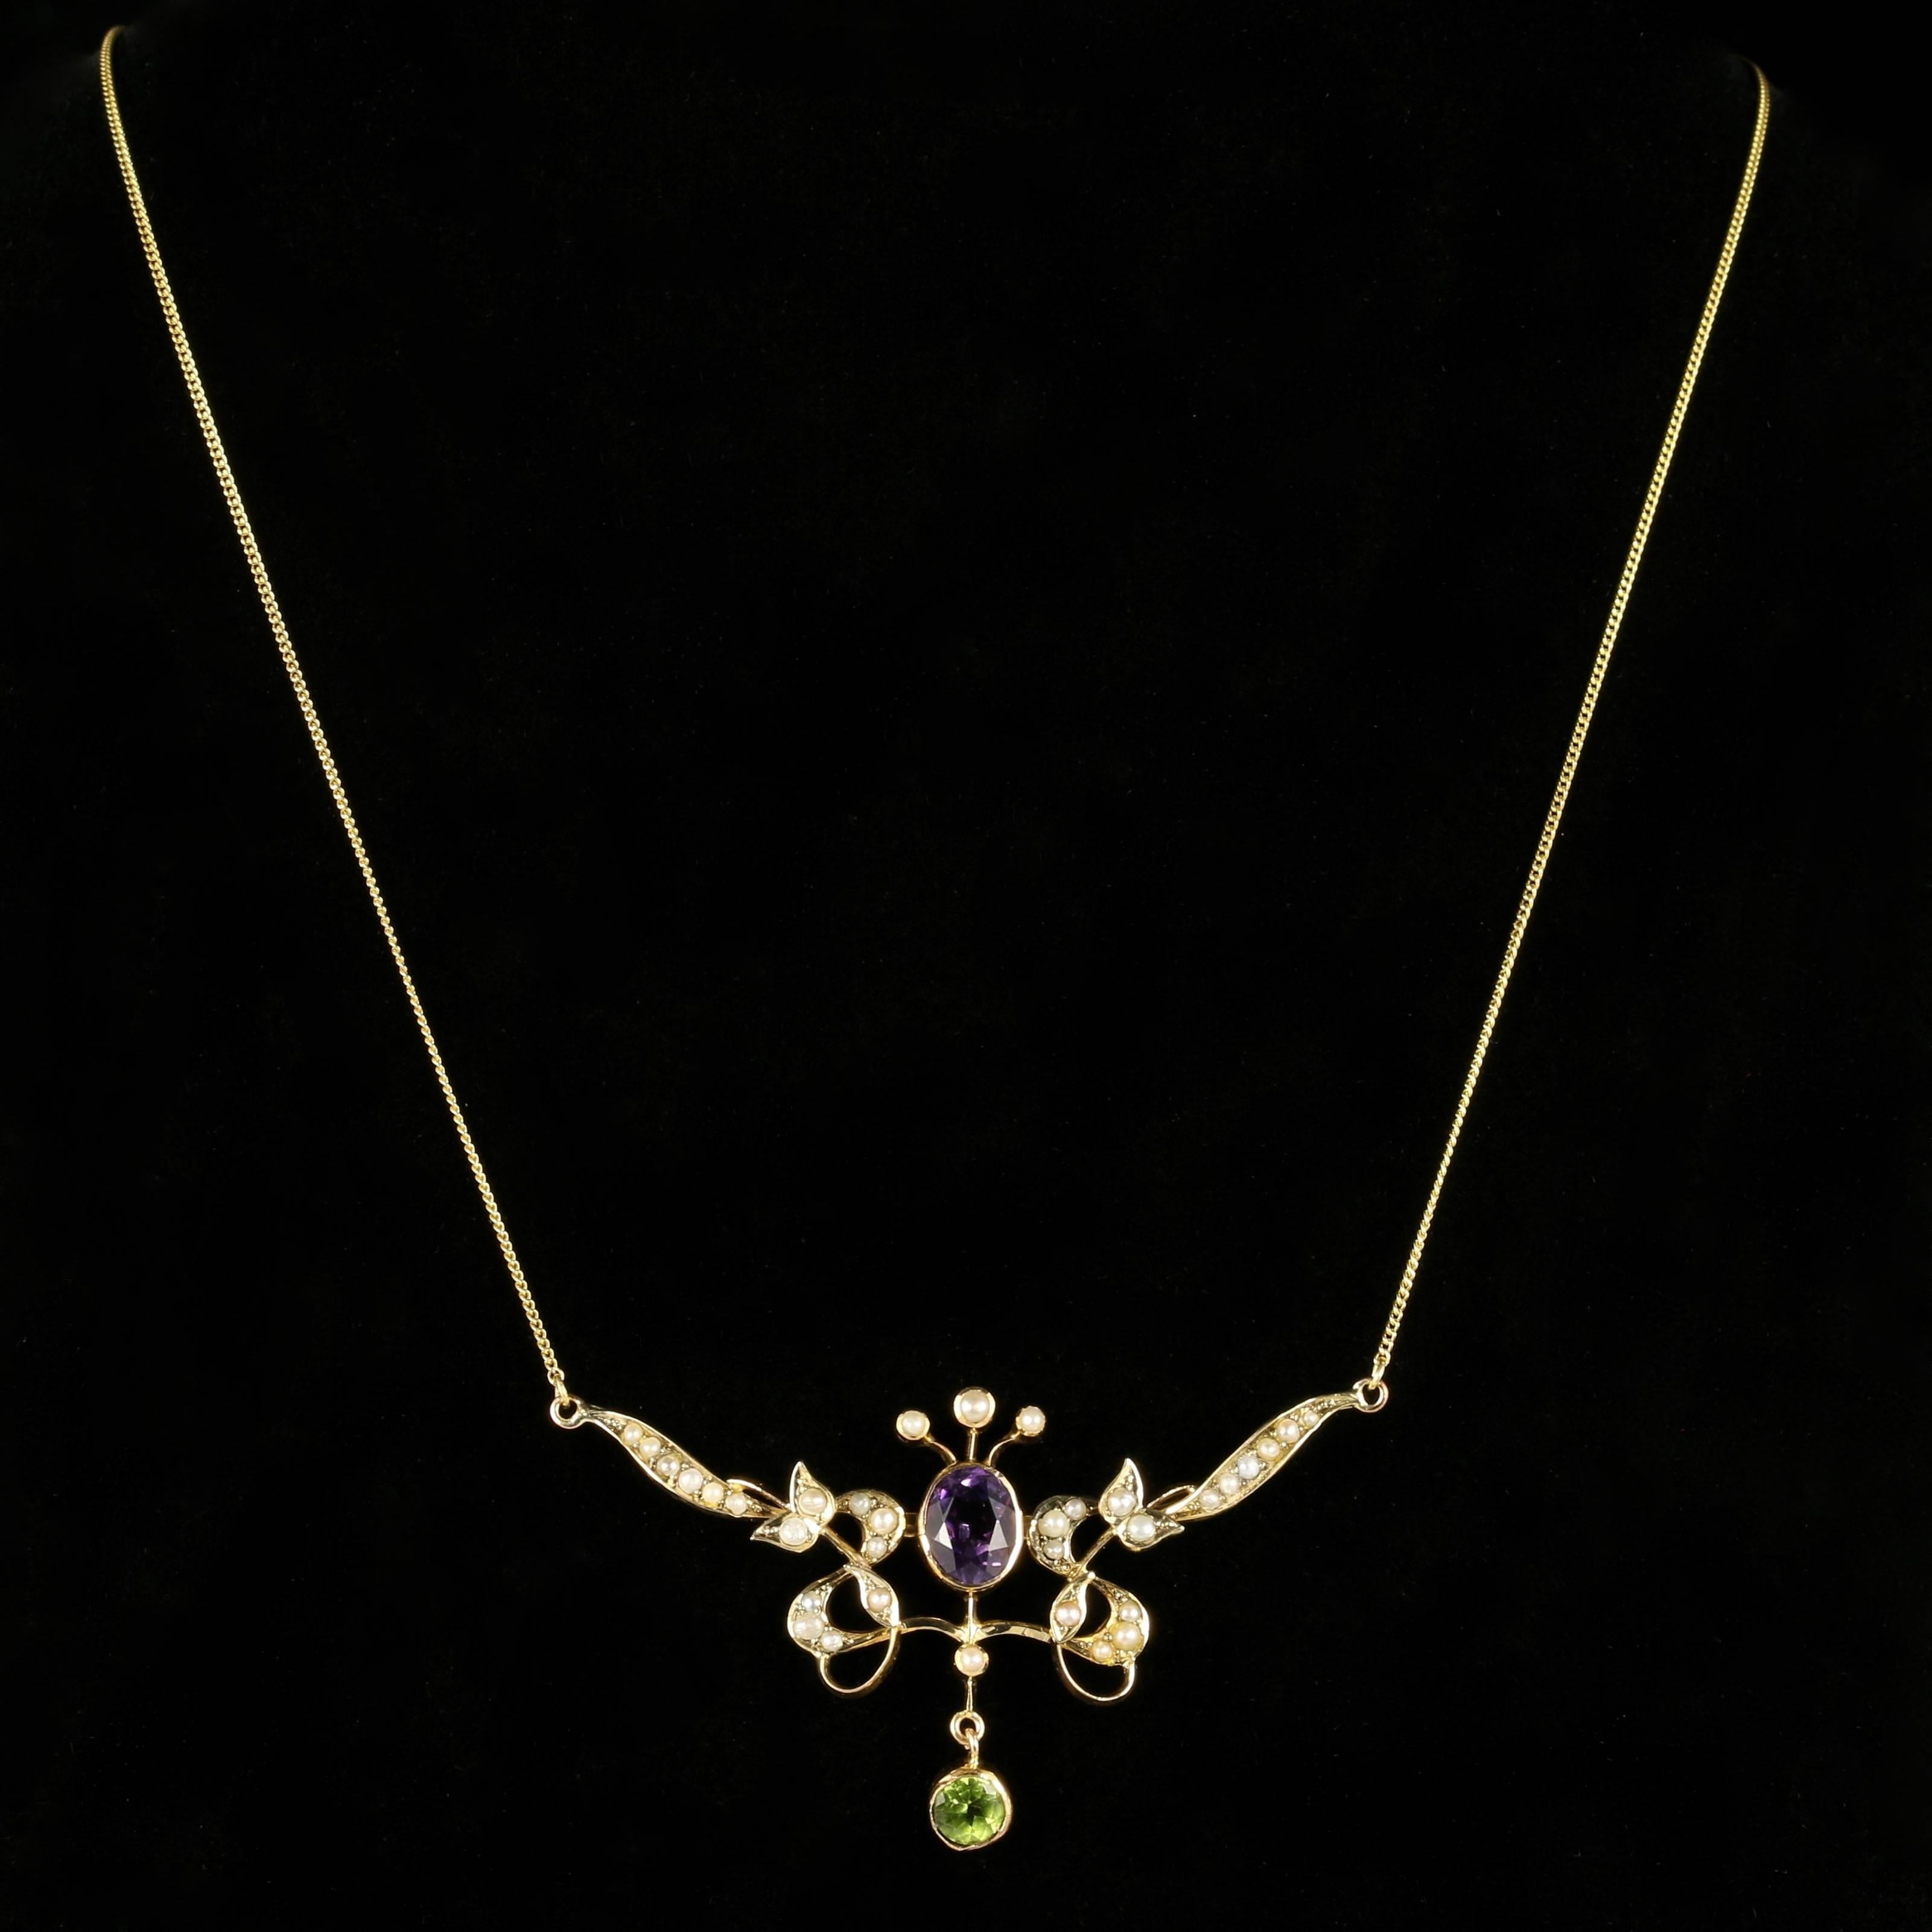 For more details please click continue reading down below...

This fabulous Antique 9ct Yellow Gold Victorian Suffragette necklace is Circa 1900.

The beautifully designed Pendant is adorned with Violet Amethyst’s, green Peridots and lovely cream